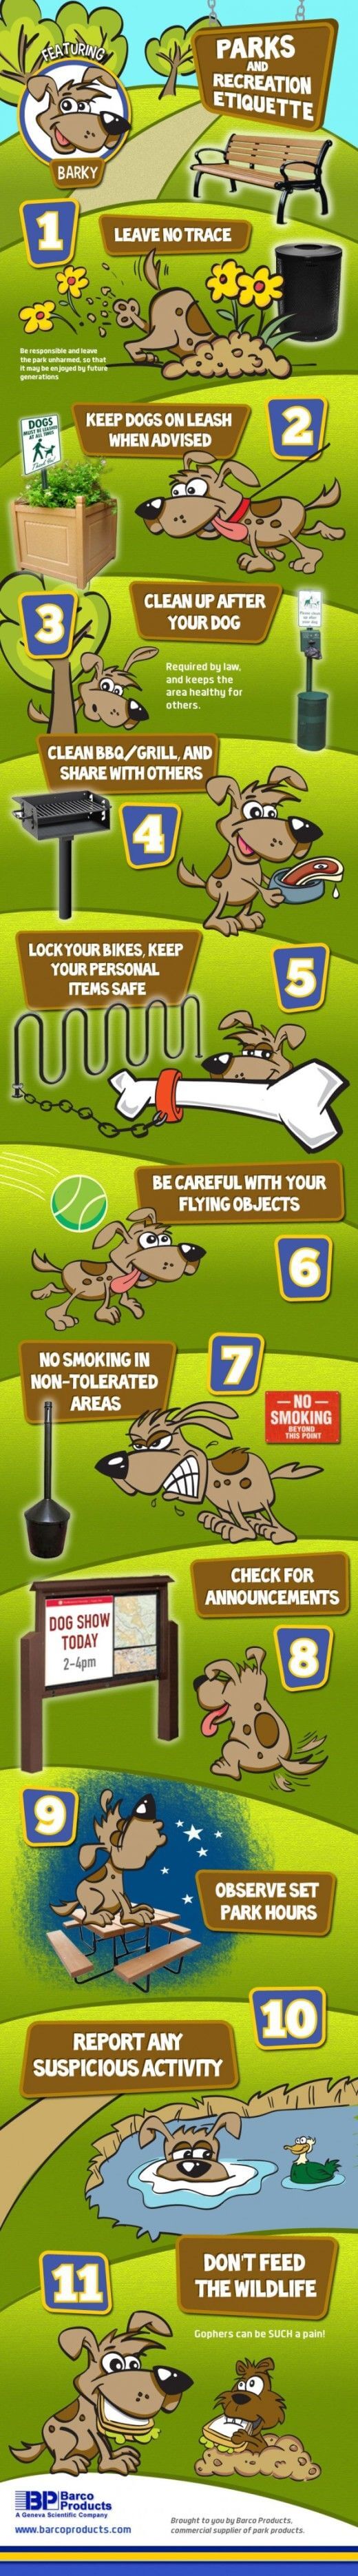 dog park infographic, infogram - PRESS TO SEE THE FULL SIZE!